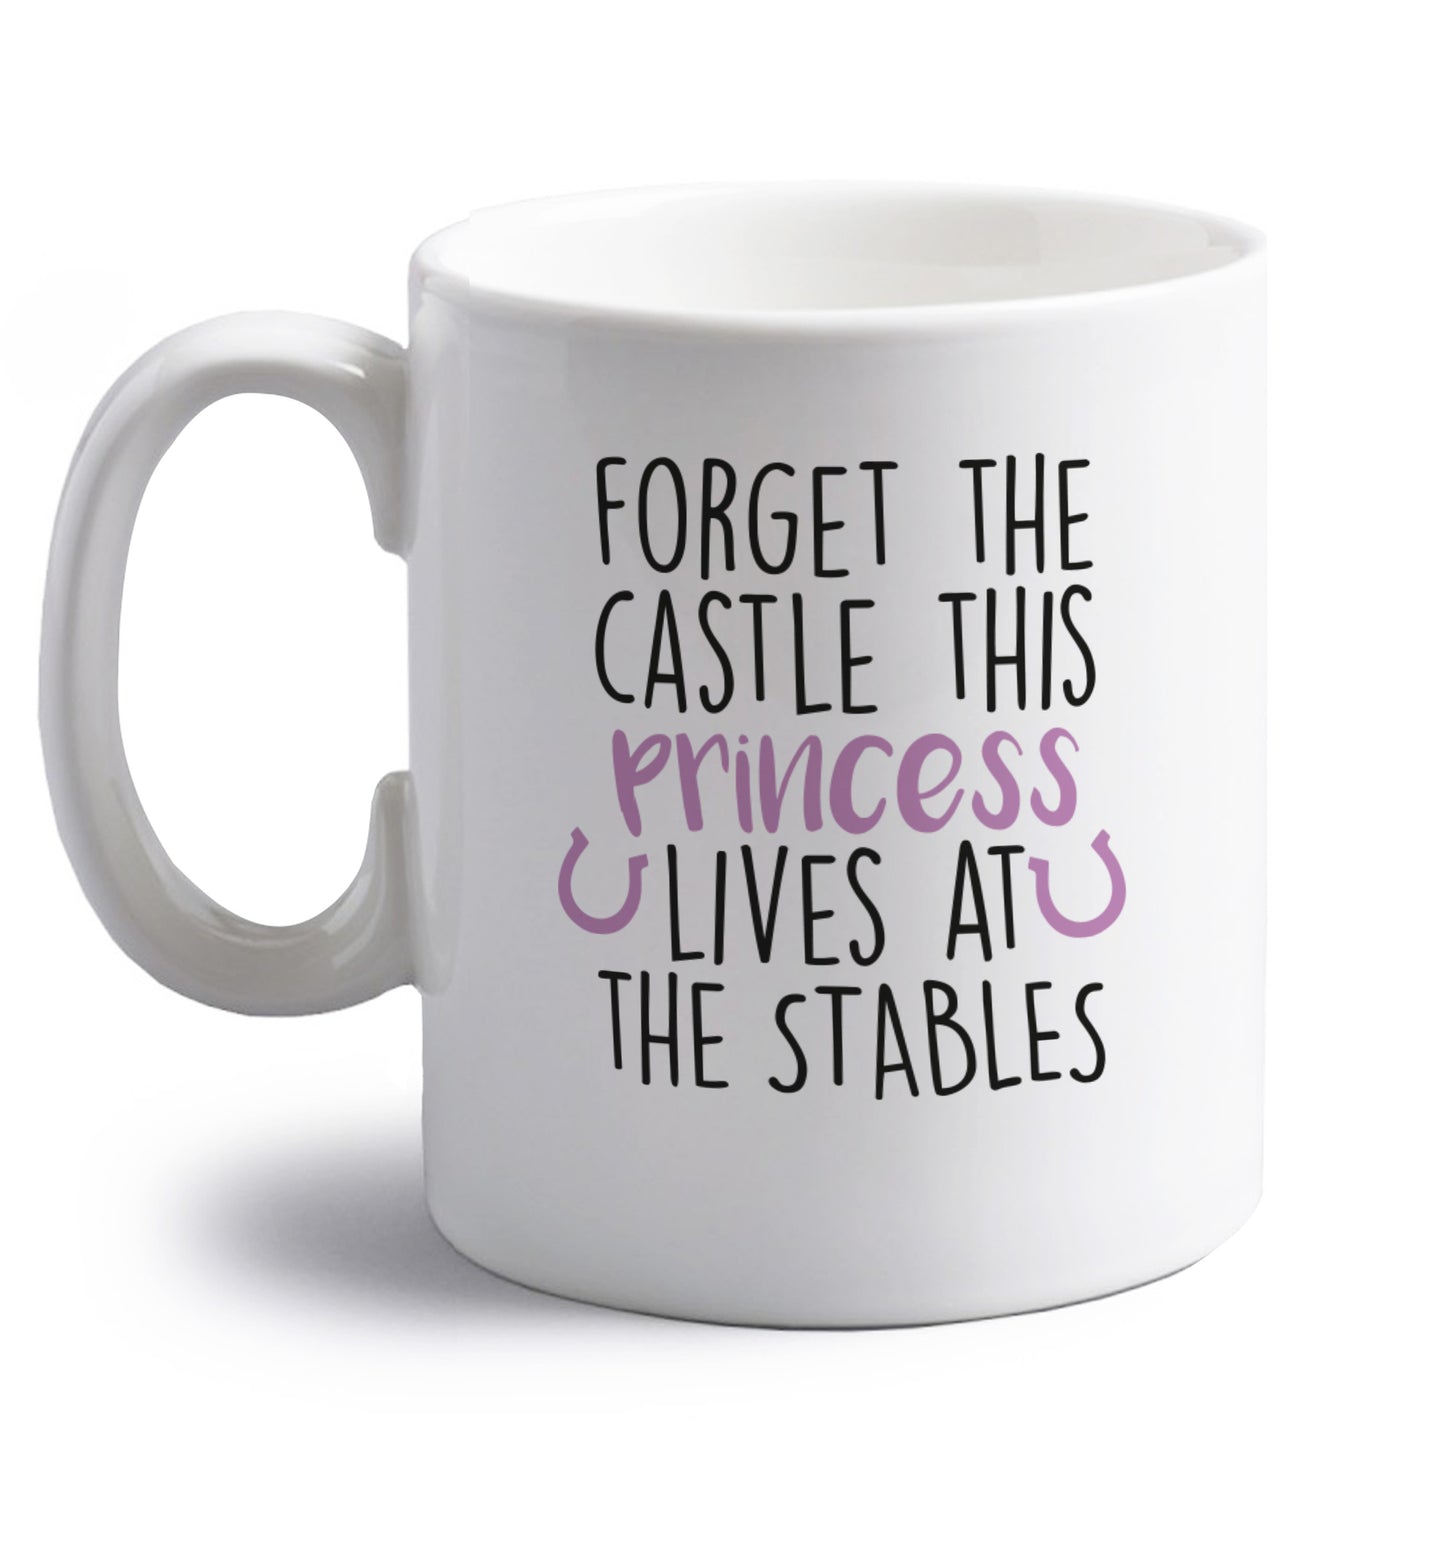 Forget the castle this princess lives at the stables right handed white ceramic mug 